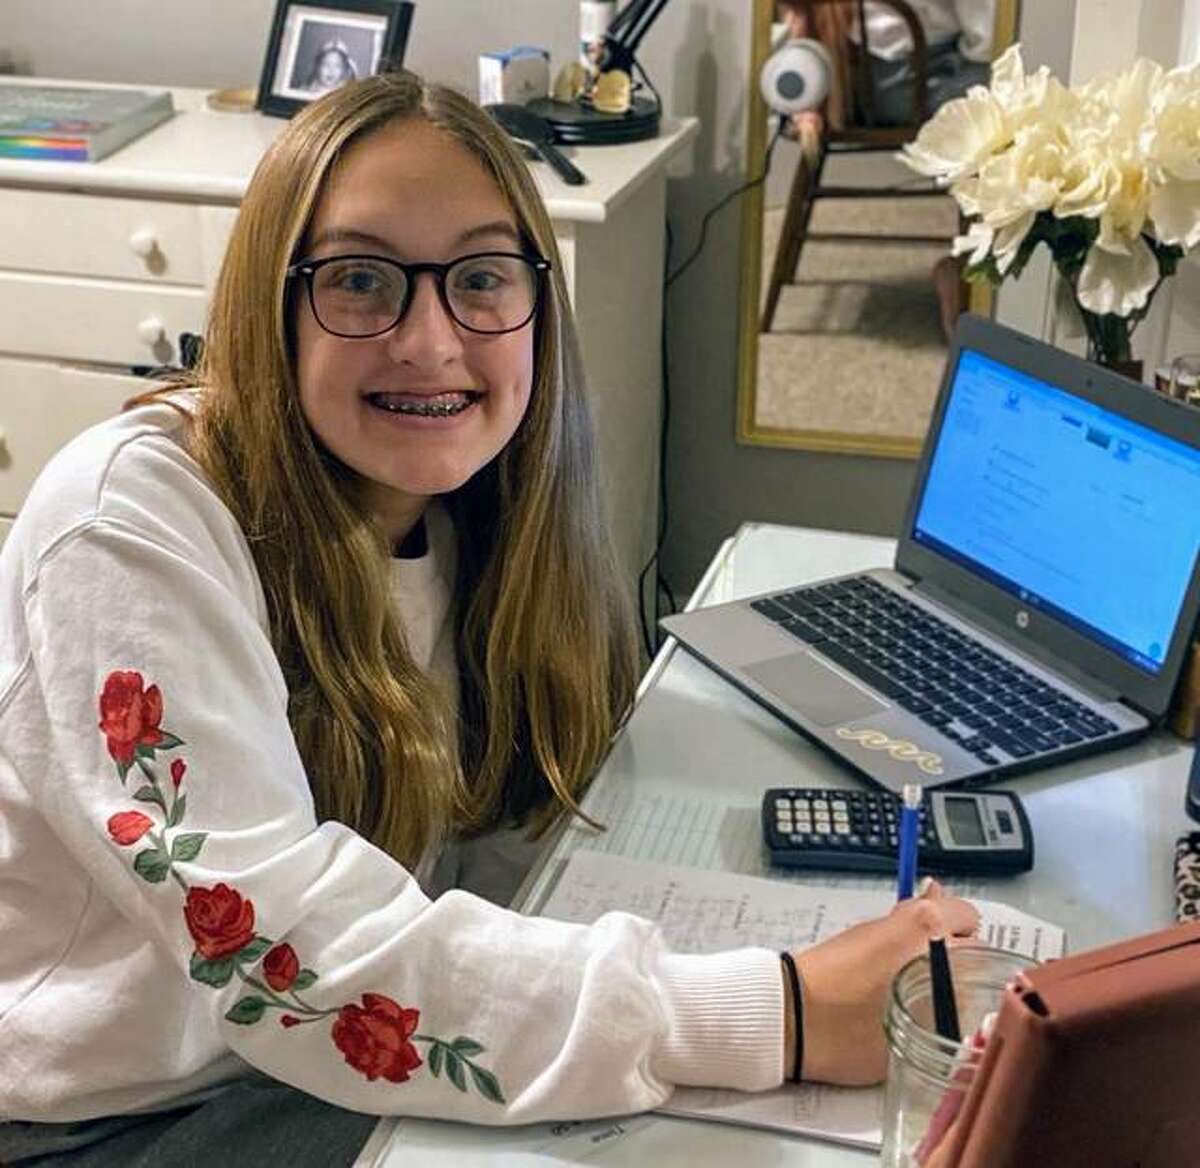 Liberty Middle School student Alayna Garman completes her classwork at home.